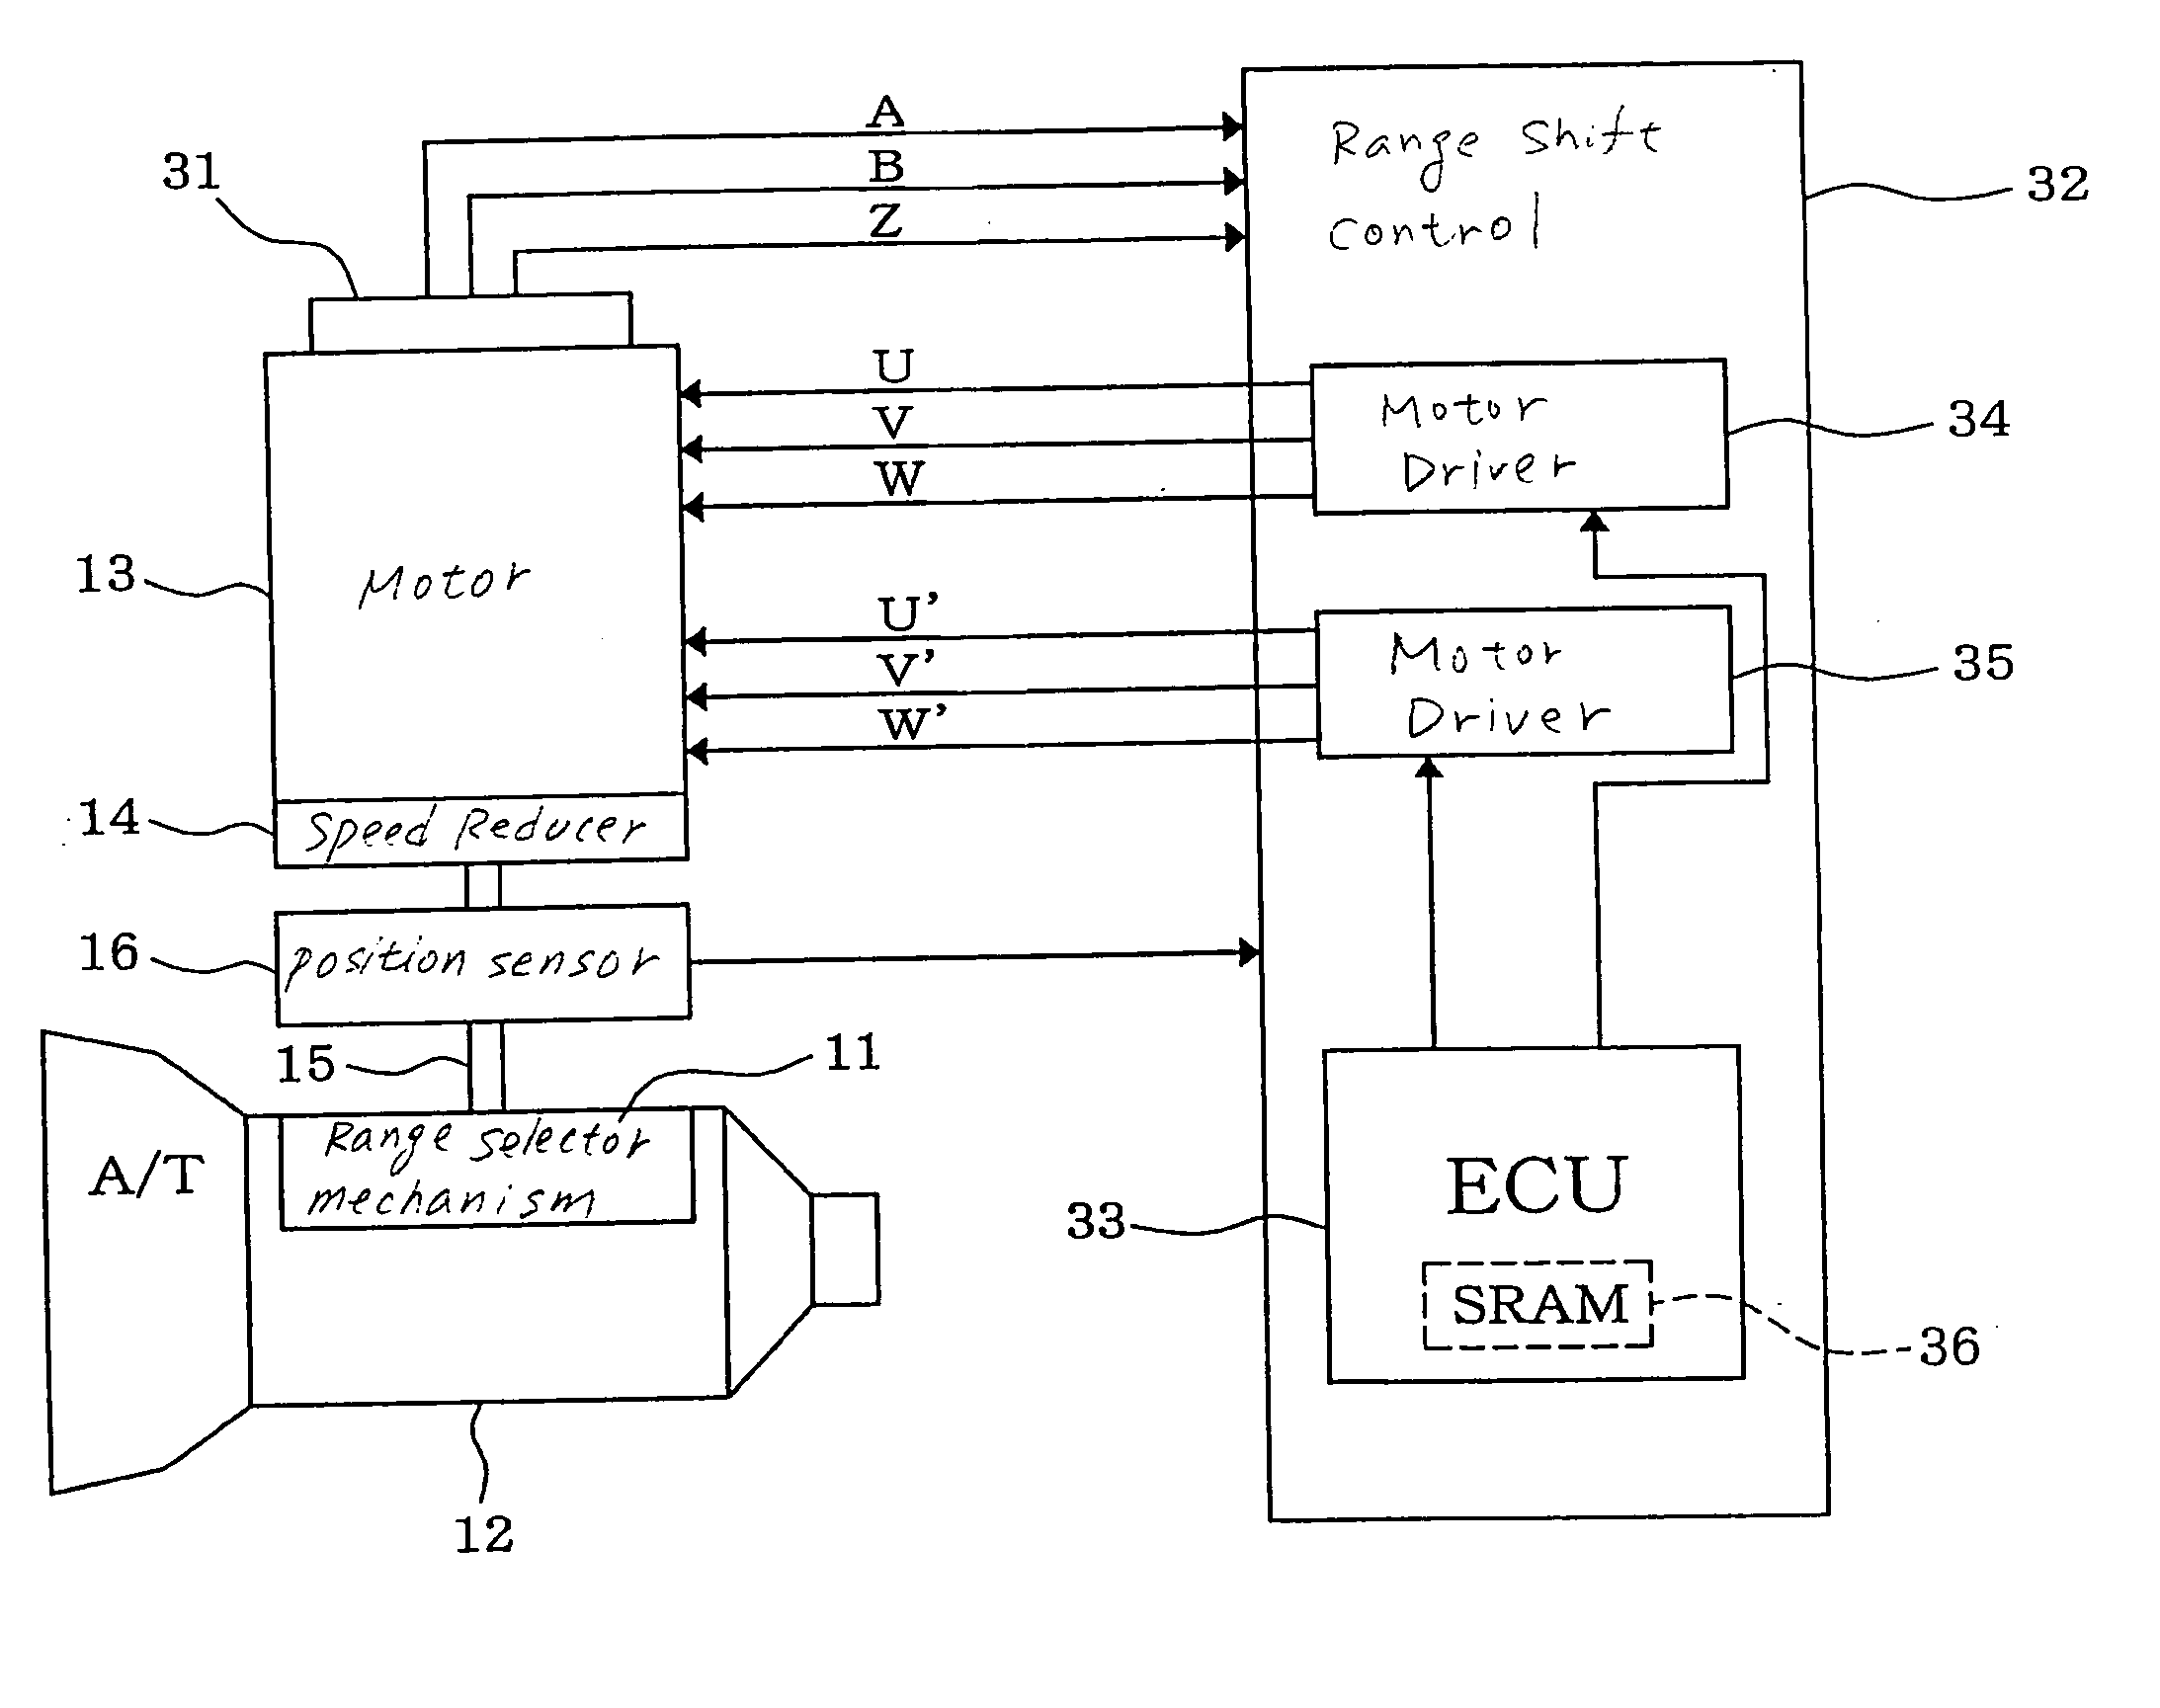 Failure monitor for motor drive control system